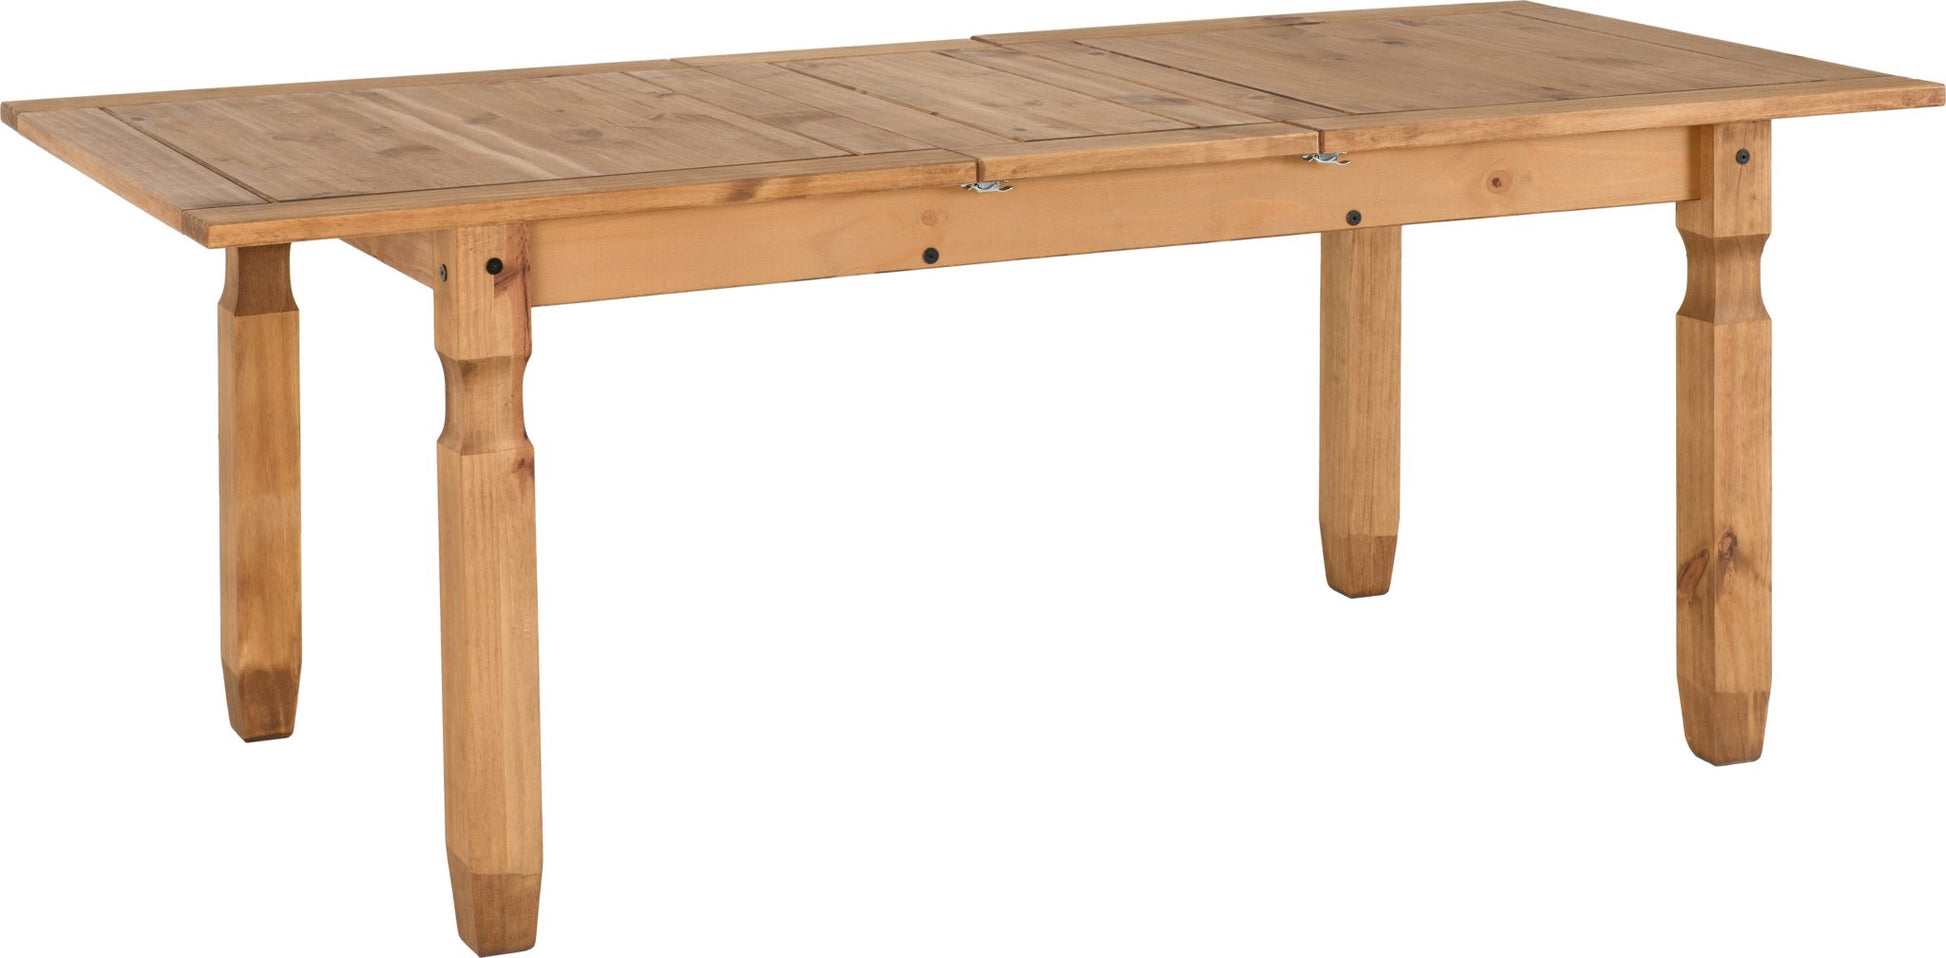 Corona Extending Dining Table - Distressed Waxed Pine